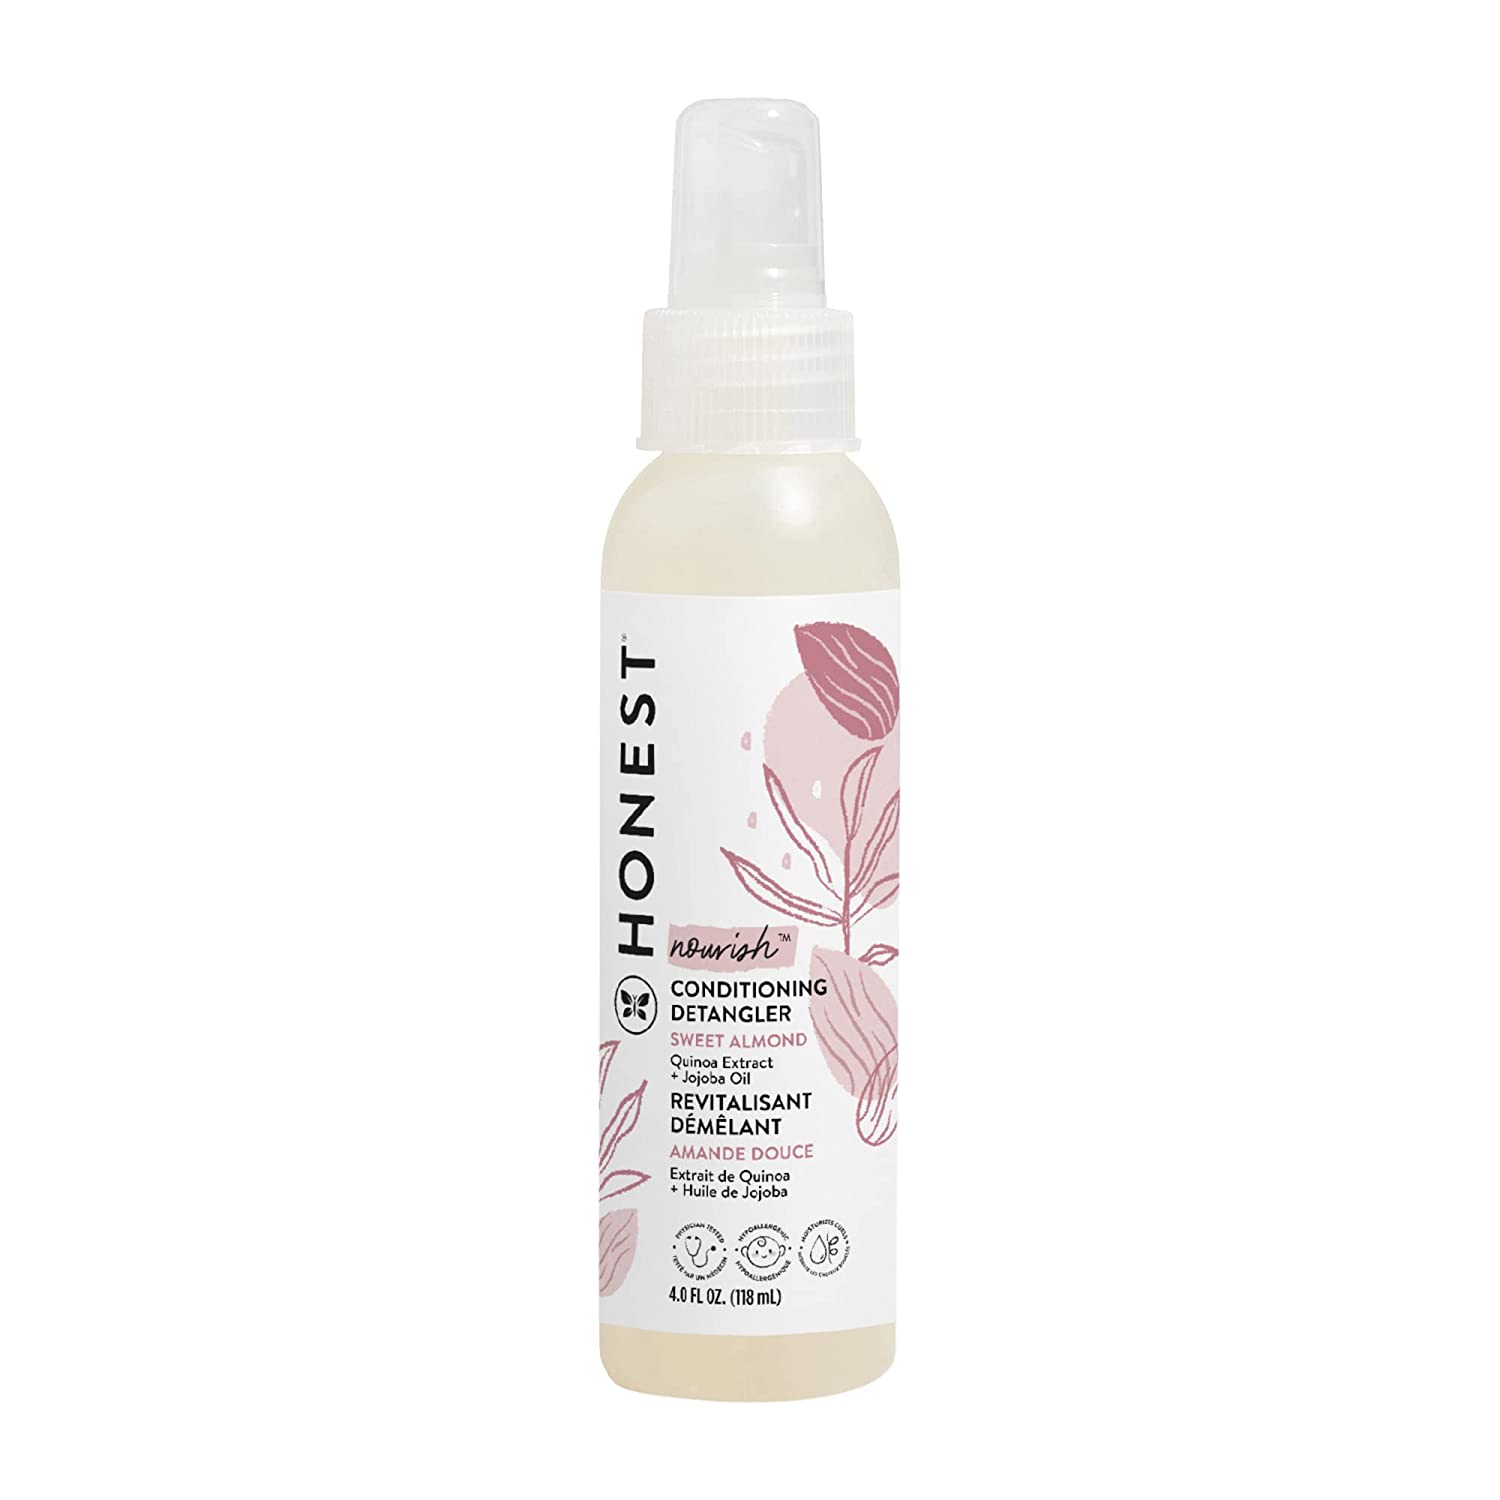 The Honest Company Conditioning Hair Detangler Leave-in Conditioner + Fortifying Spray Tear-free, Cruelty-Free, Hypoallergenic Almond Nourishing 118 ml.